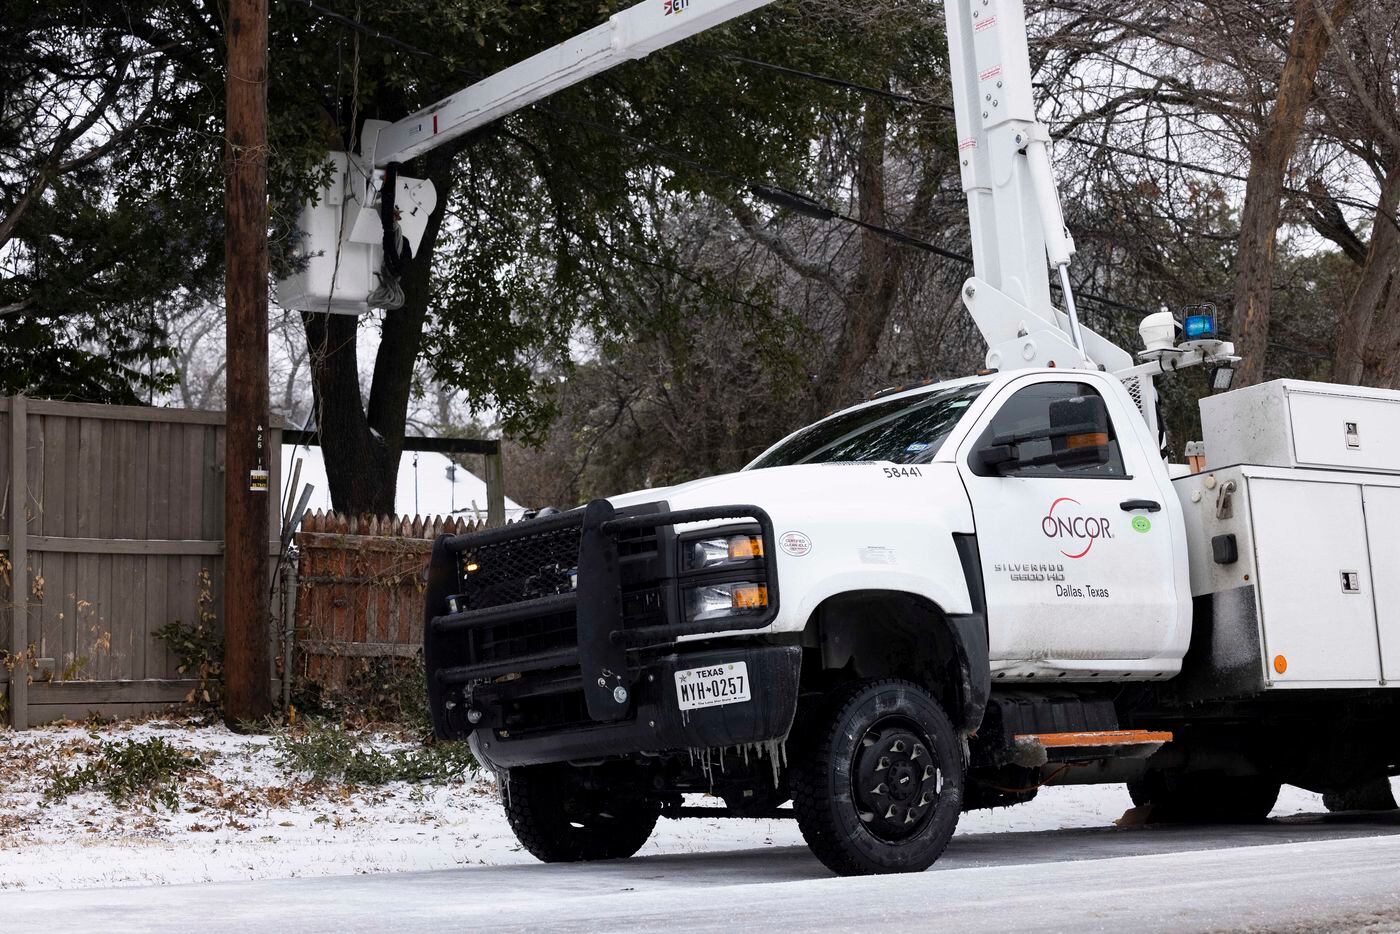 An Oncor technician works on a power line close to the intersection of W Illinois Ave and S...